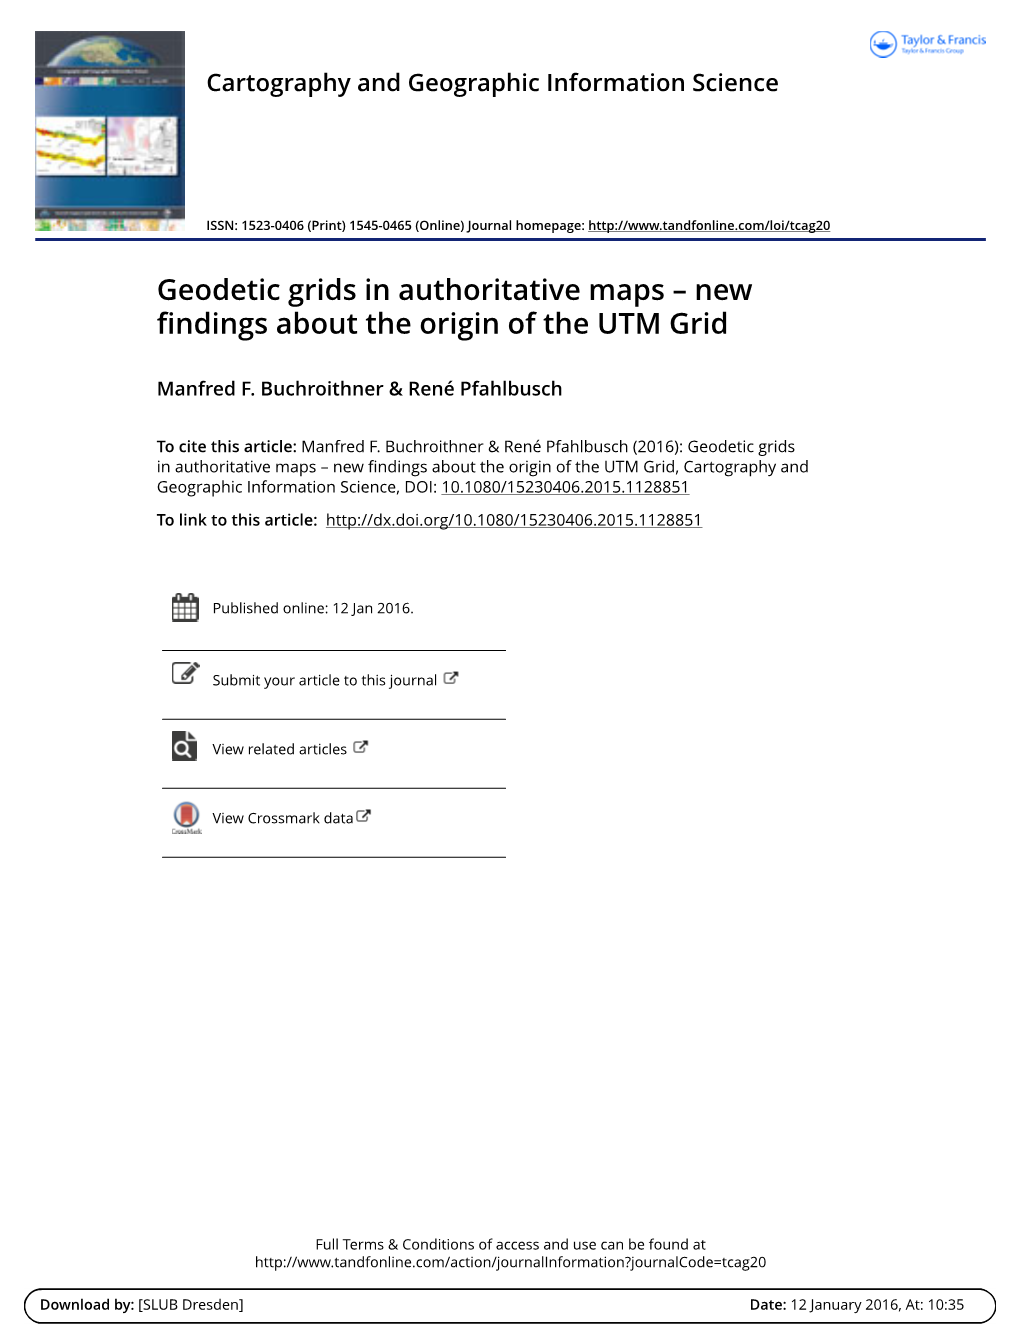 Geodetic Grids in Authoritative Maps – New Findings About the Origin of the UTM Grid